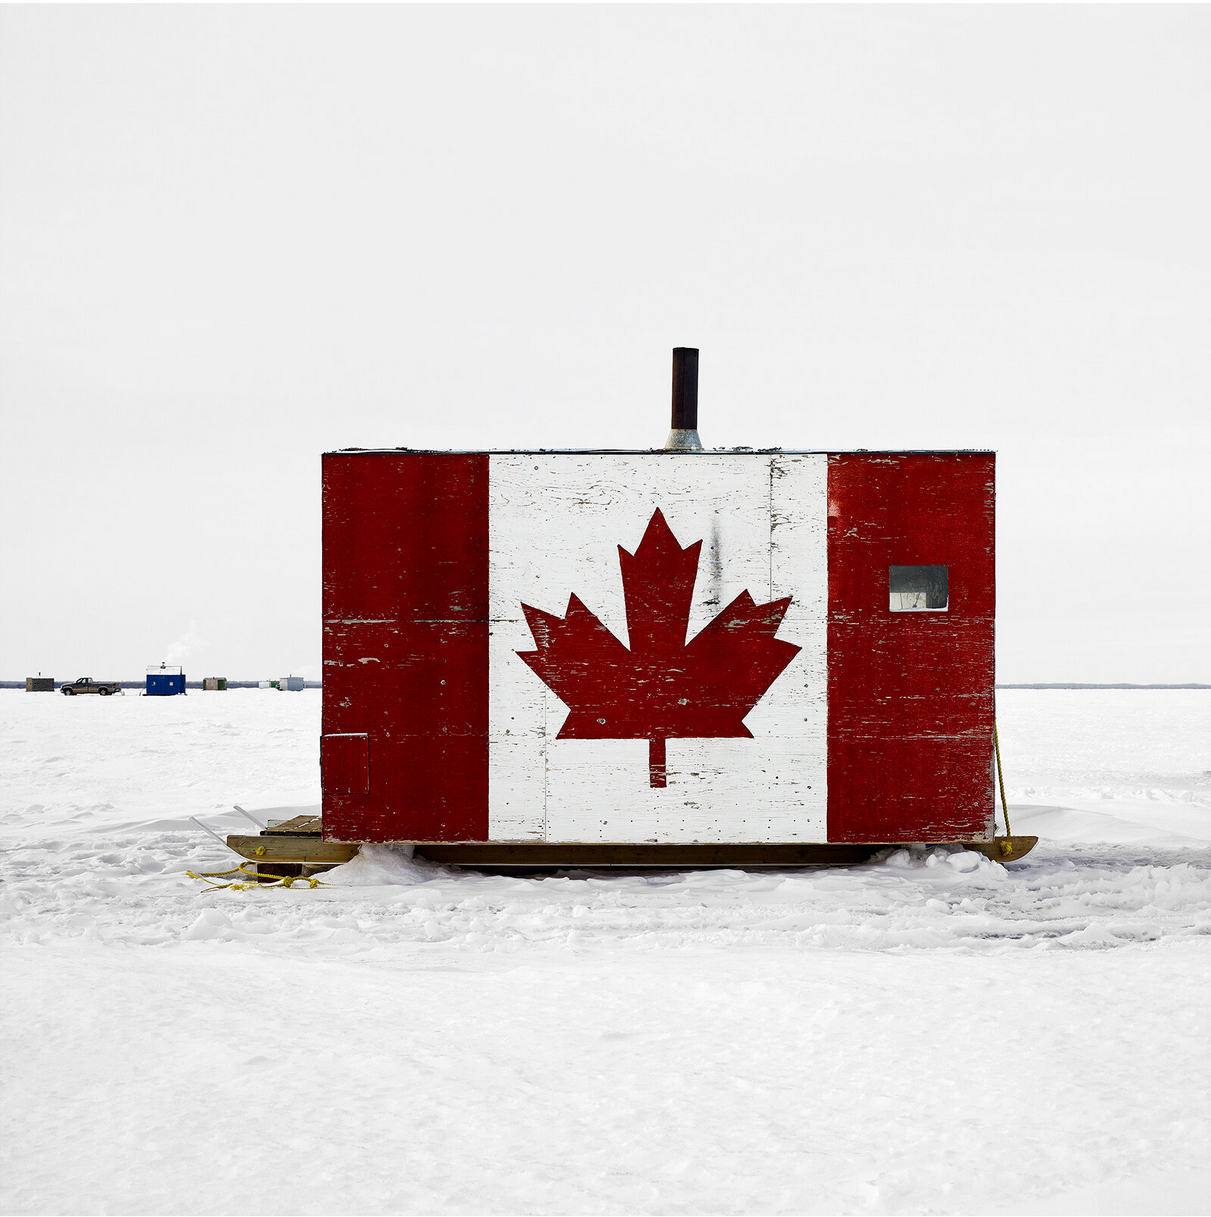 An ice fishing hut that has been painted like a Canadian flag.